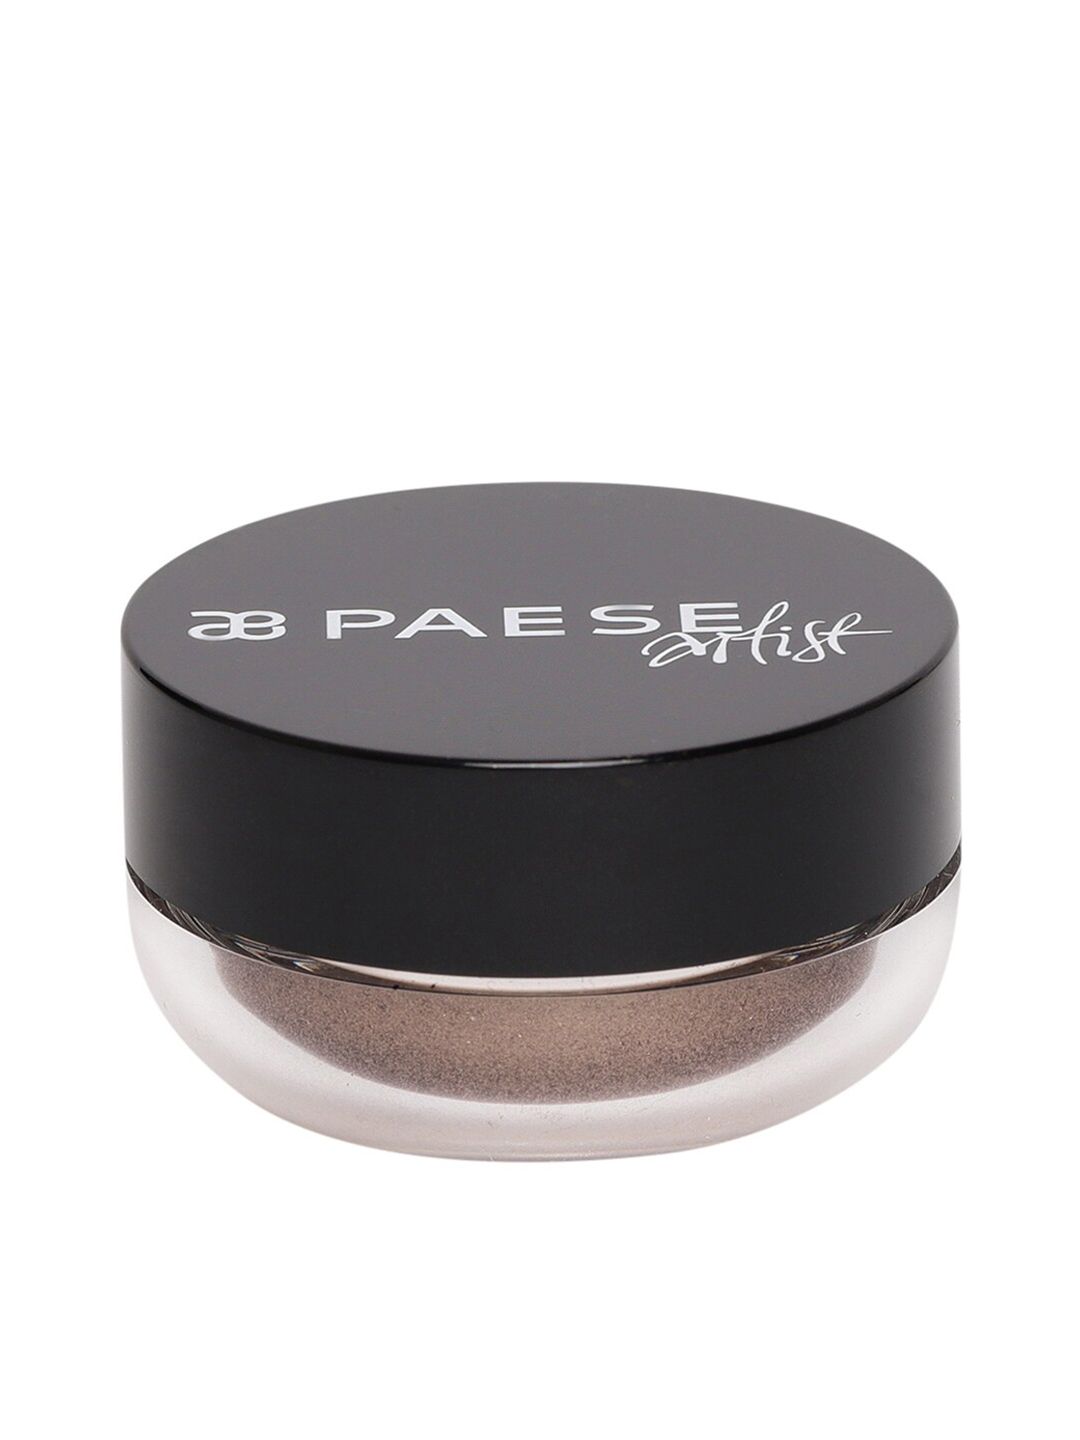 Paese Cosmetics Pure Pigments Eyeshadow - Golden Brown 06 Price in India